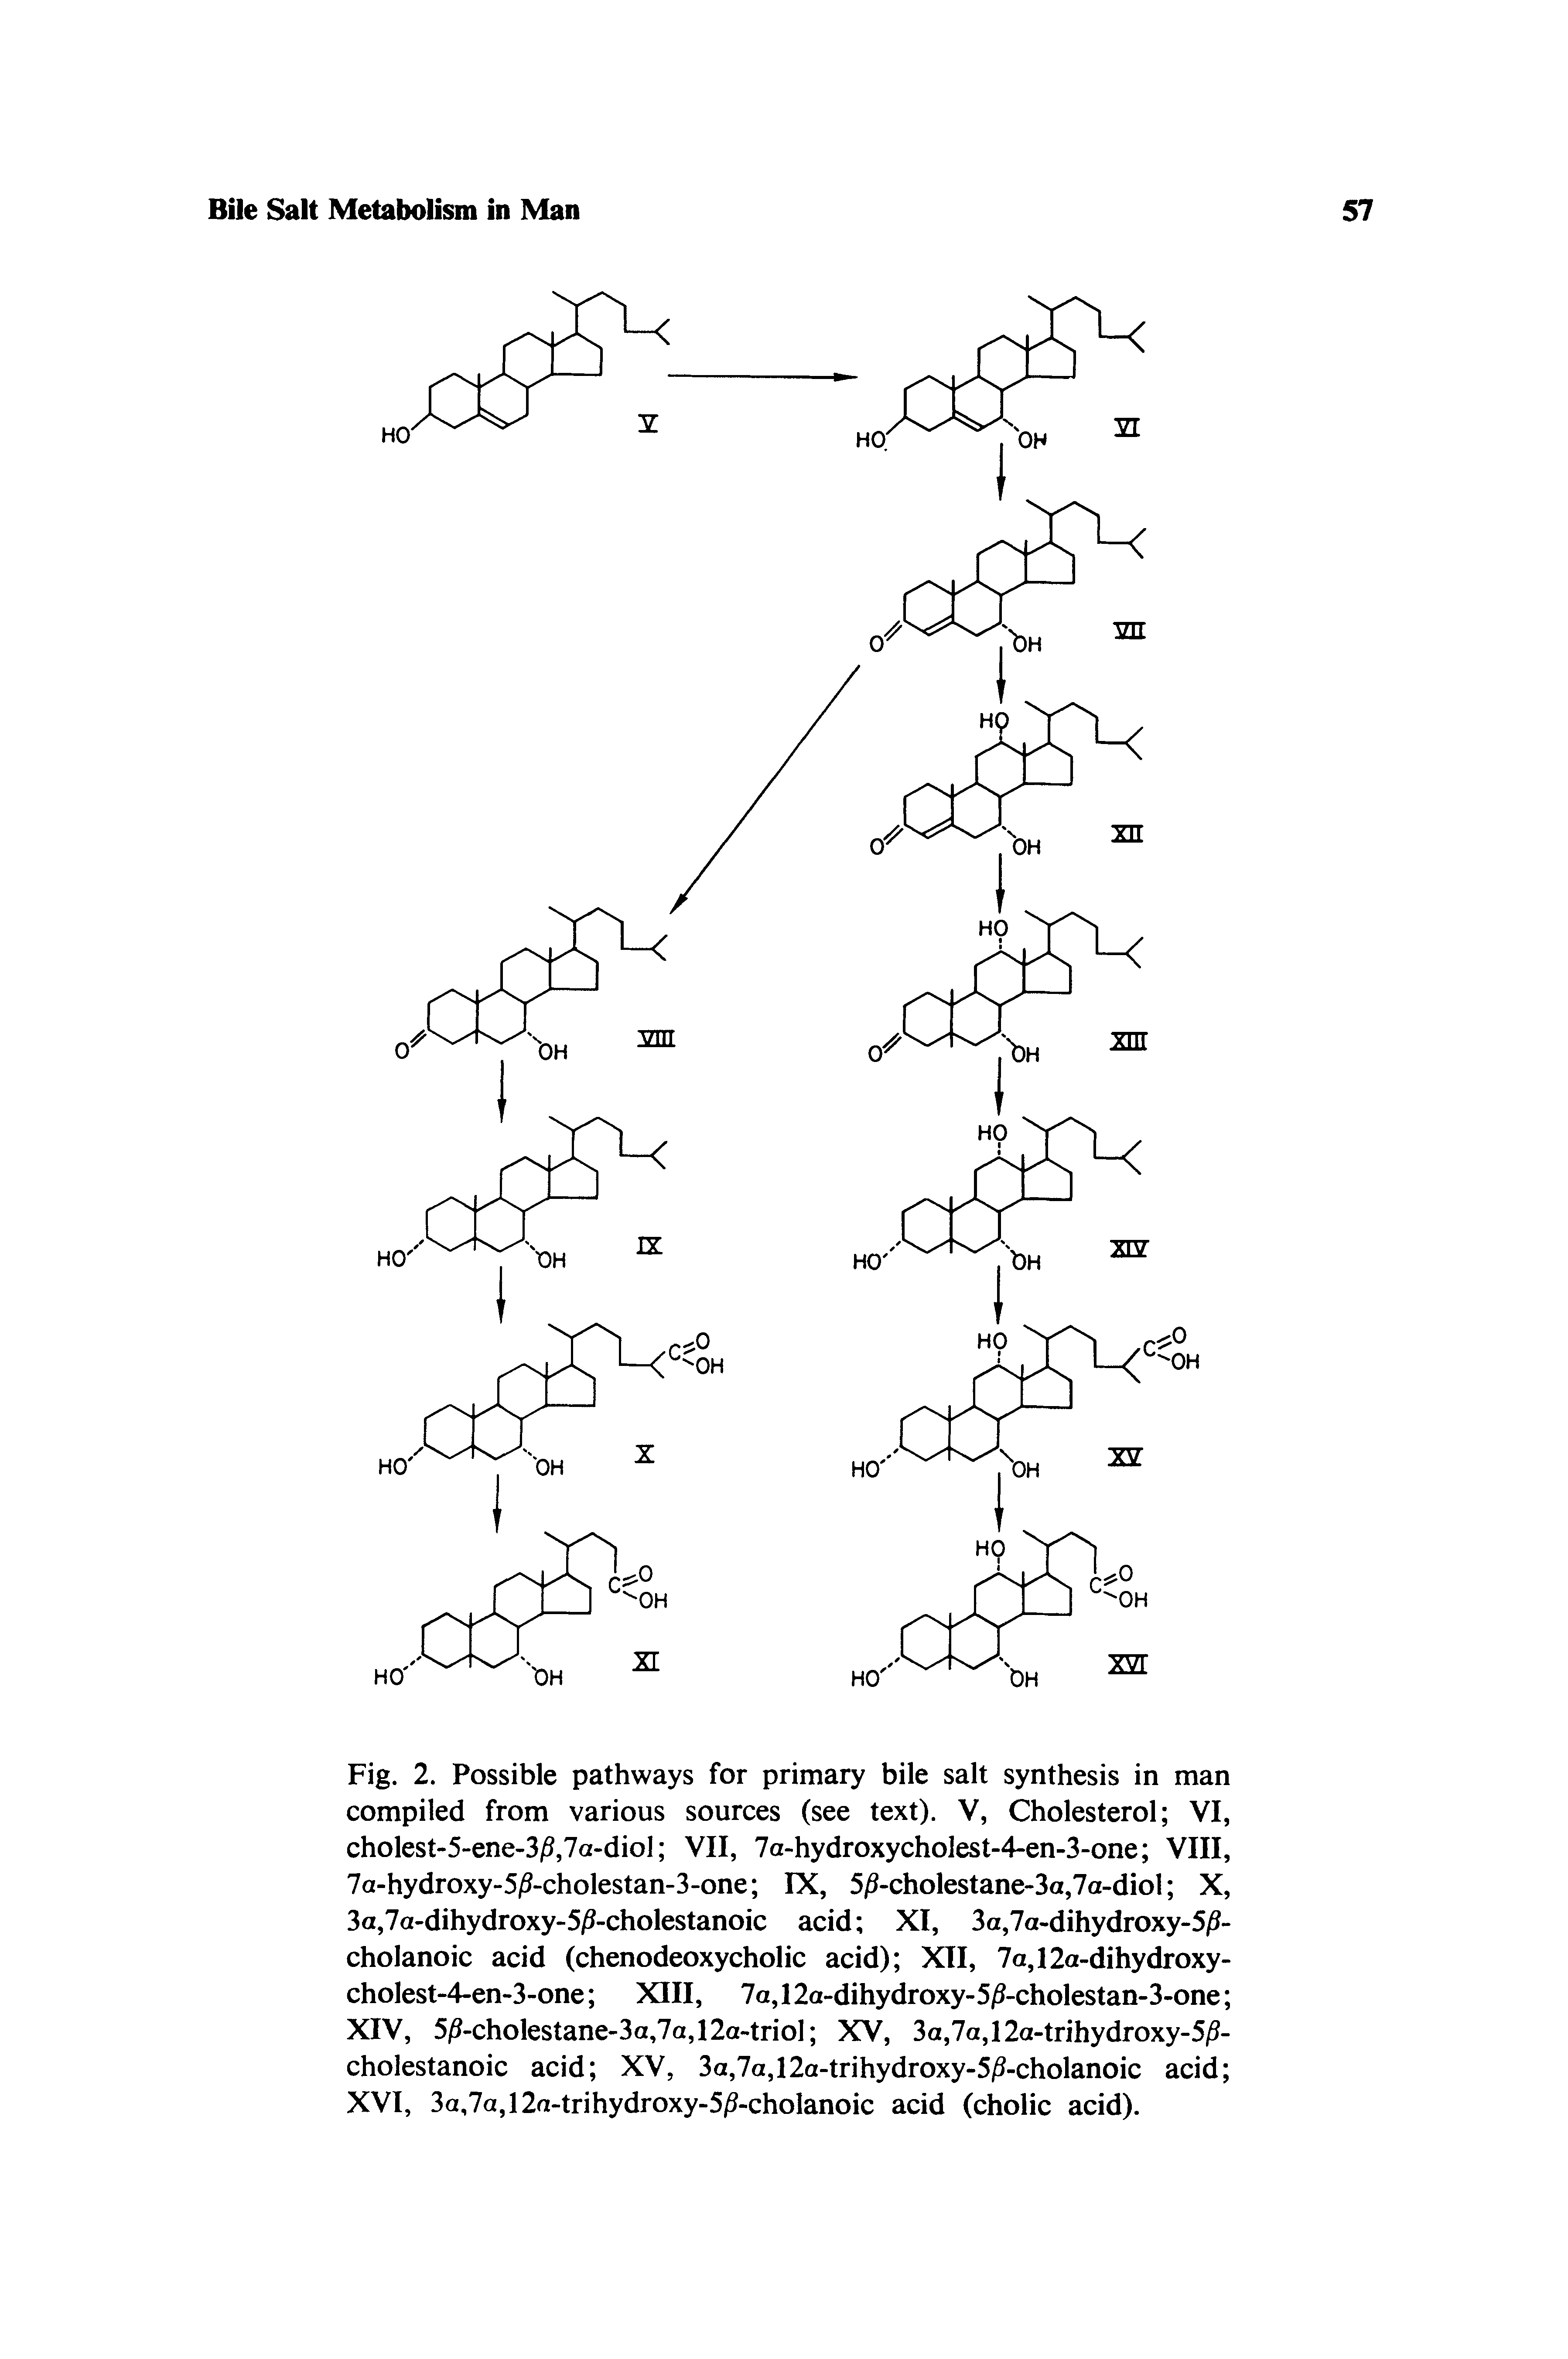 Fig. 2. Possible pathways for primary bile salt synthesis in man compiled from various sources (see text). V, Cholesterol VI, cholest-5-ene-3i3,7a-diol VII, 7a-hydroxycholest-4-en-3-one VIII, 7a-hydroxy-5/S-cholestan-3-one IX, 5/3-cholestane-3a,7a-diol X, 3a,7a-dihydroxy-5/3-cholestanoic acid XI, 3a,7a-dihydroxy-5/5-cholanoic acid (chenodeoxycholic acid) XII, 7a,12a-dihydroxy-cholest-4-en-3-one XIII, 7a,12a-dihydroxy-5/3-cholestan-3-one XIV, 5 -cholestane-3a,7a,12a-triol XV, 3a,7a,12a-trihydroxy-5/5-cholestanoic acid XV, 3a,7a,12a-trihydroxy-5/3-cholanoic acid XVI, 3a,7a,12a-trihydroxy-5/3-cholanoic acid (cholic acid).